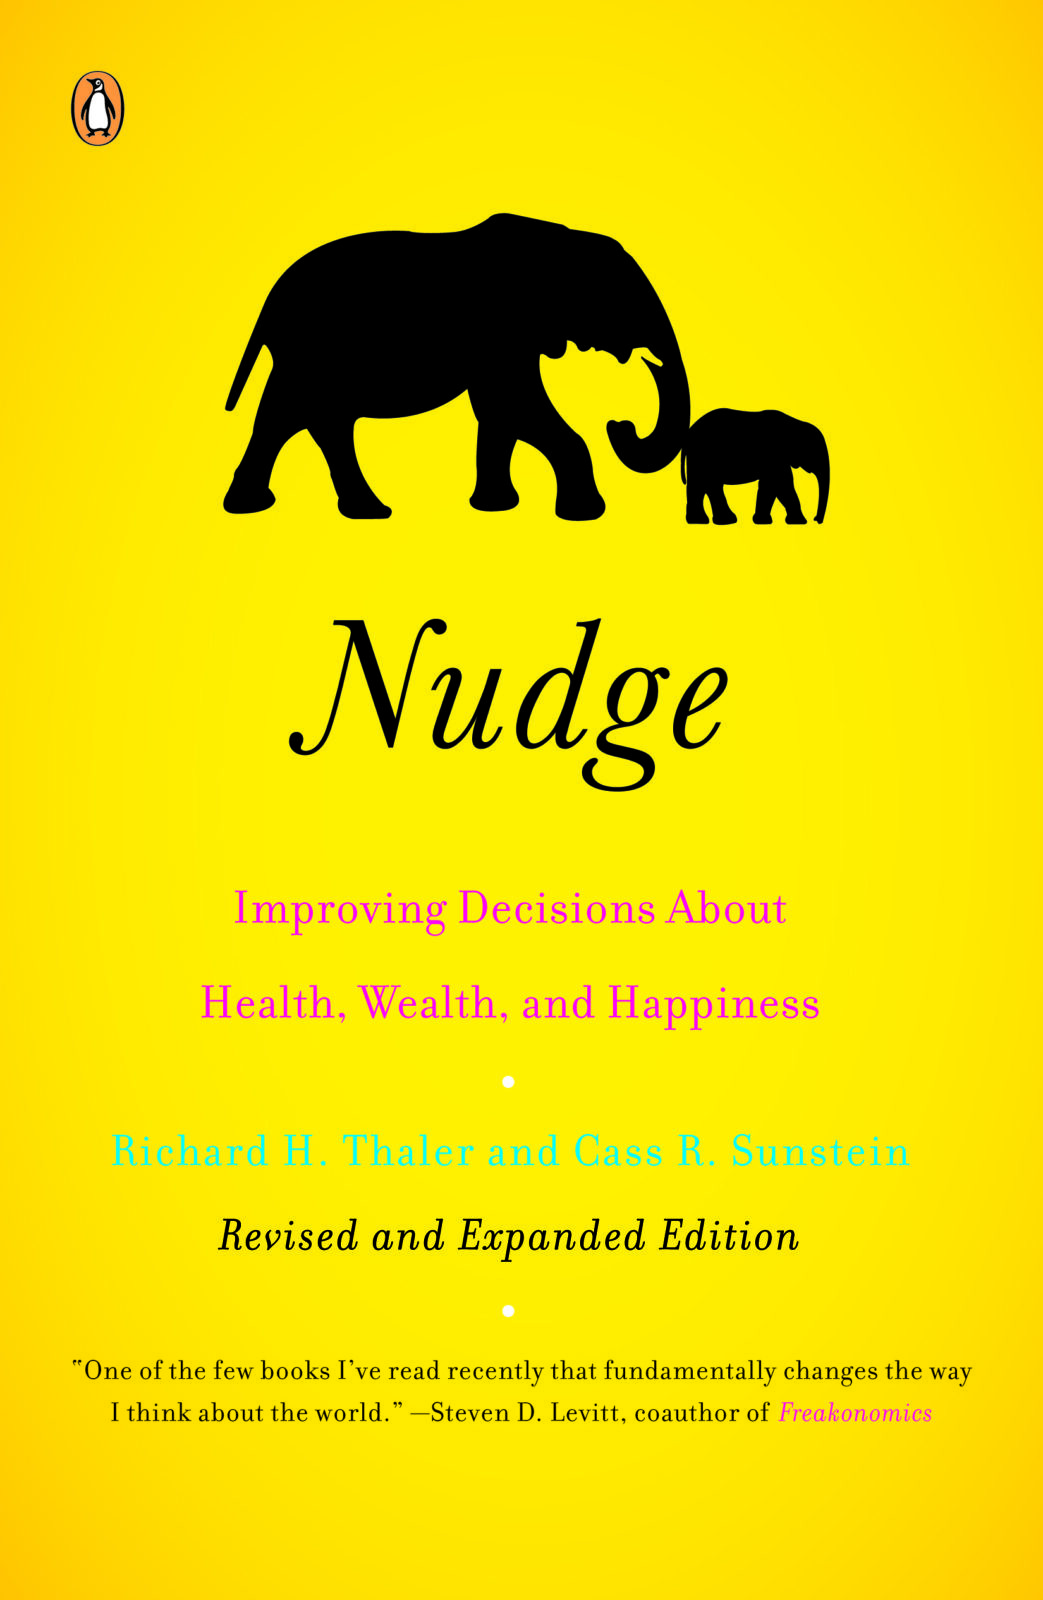 nudge-front